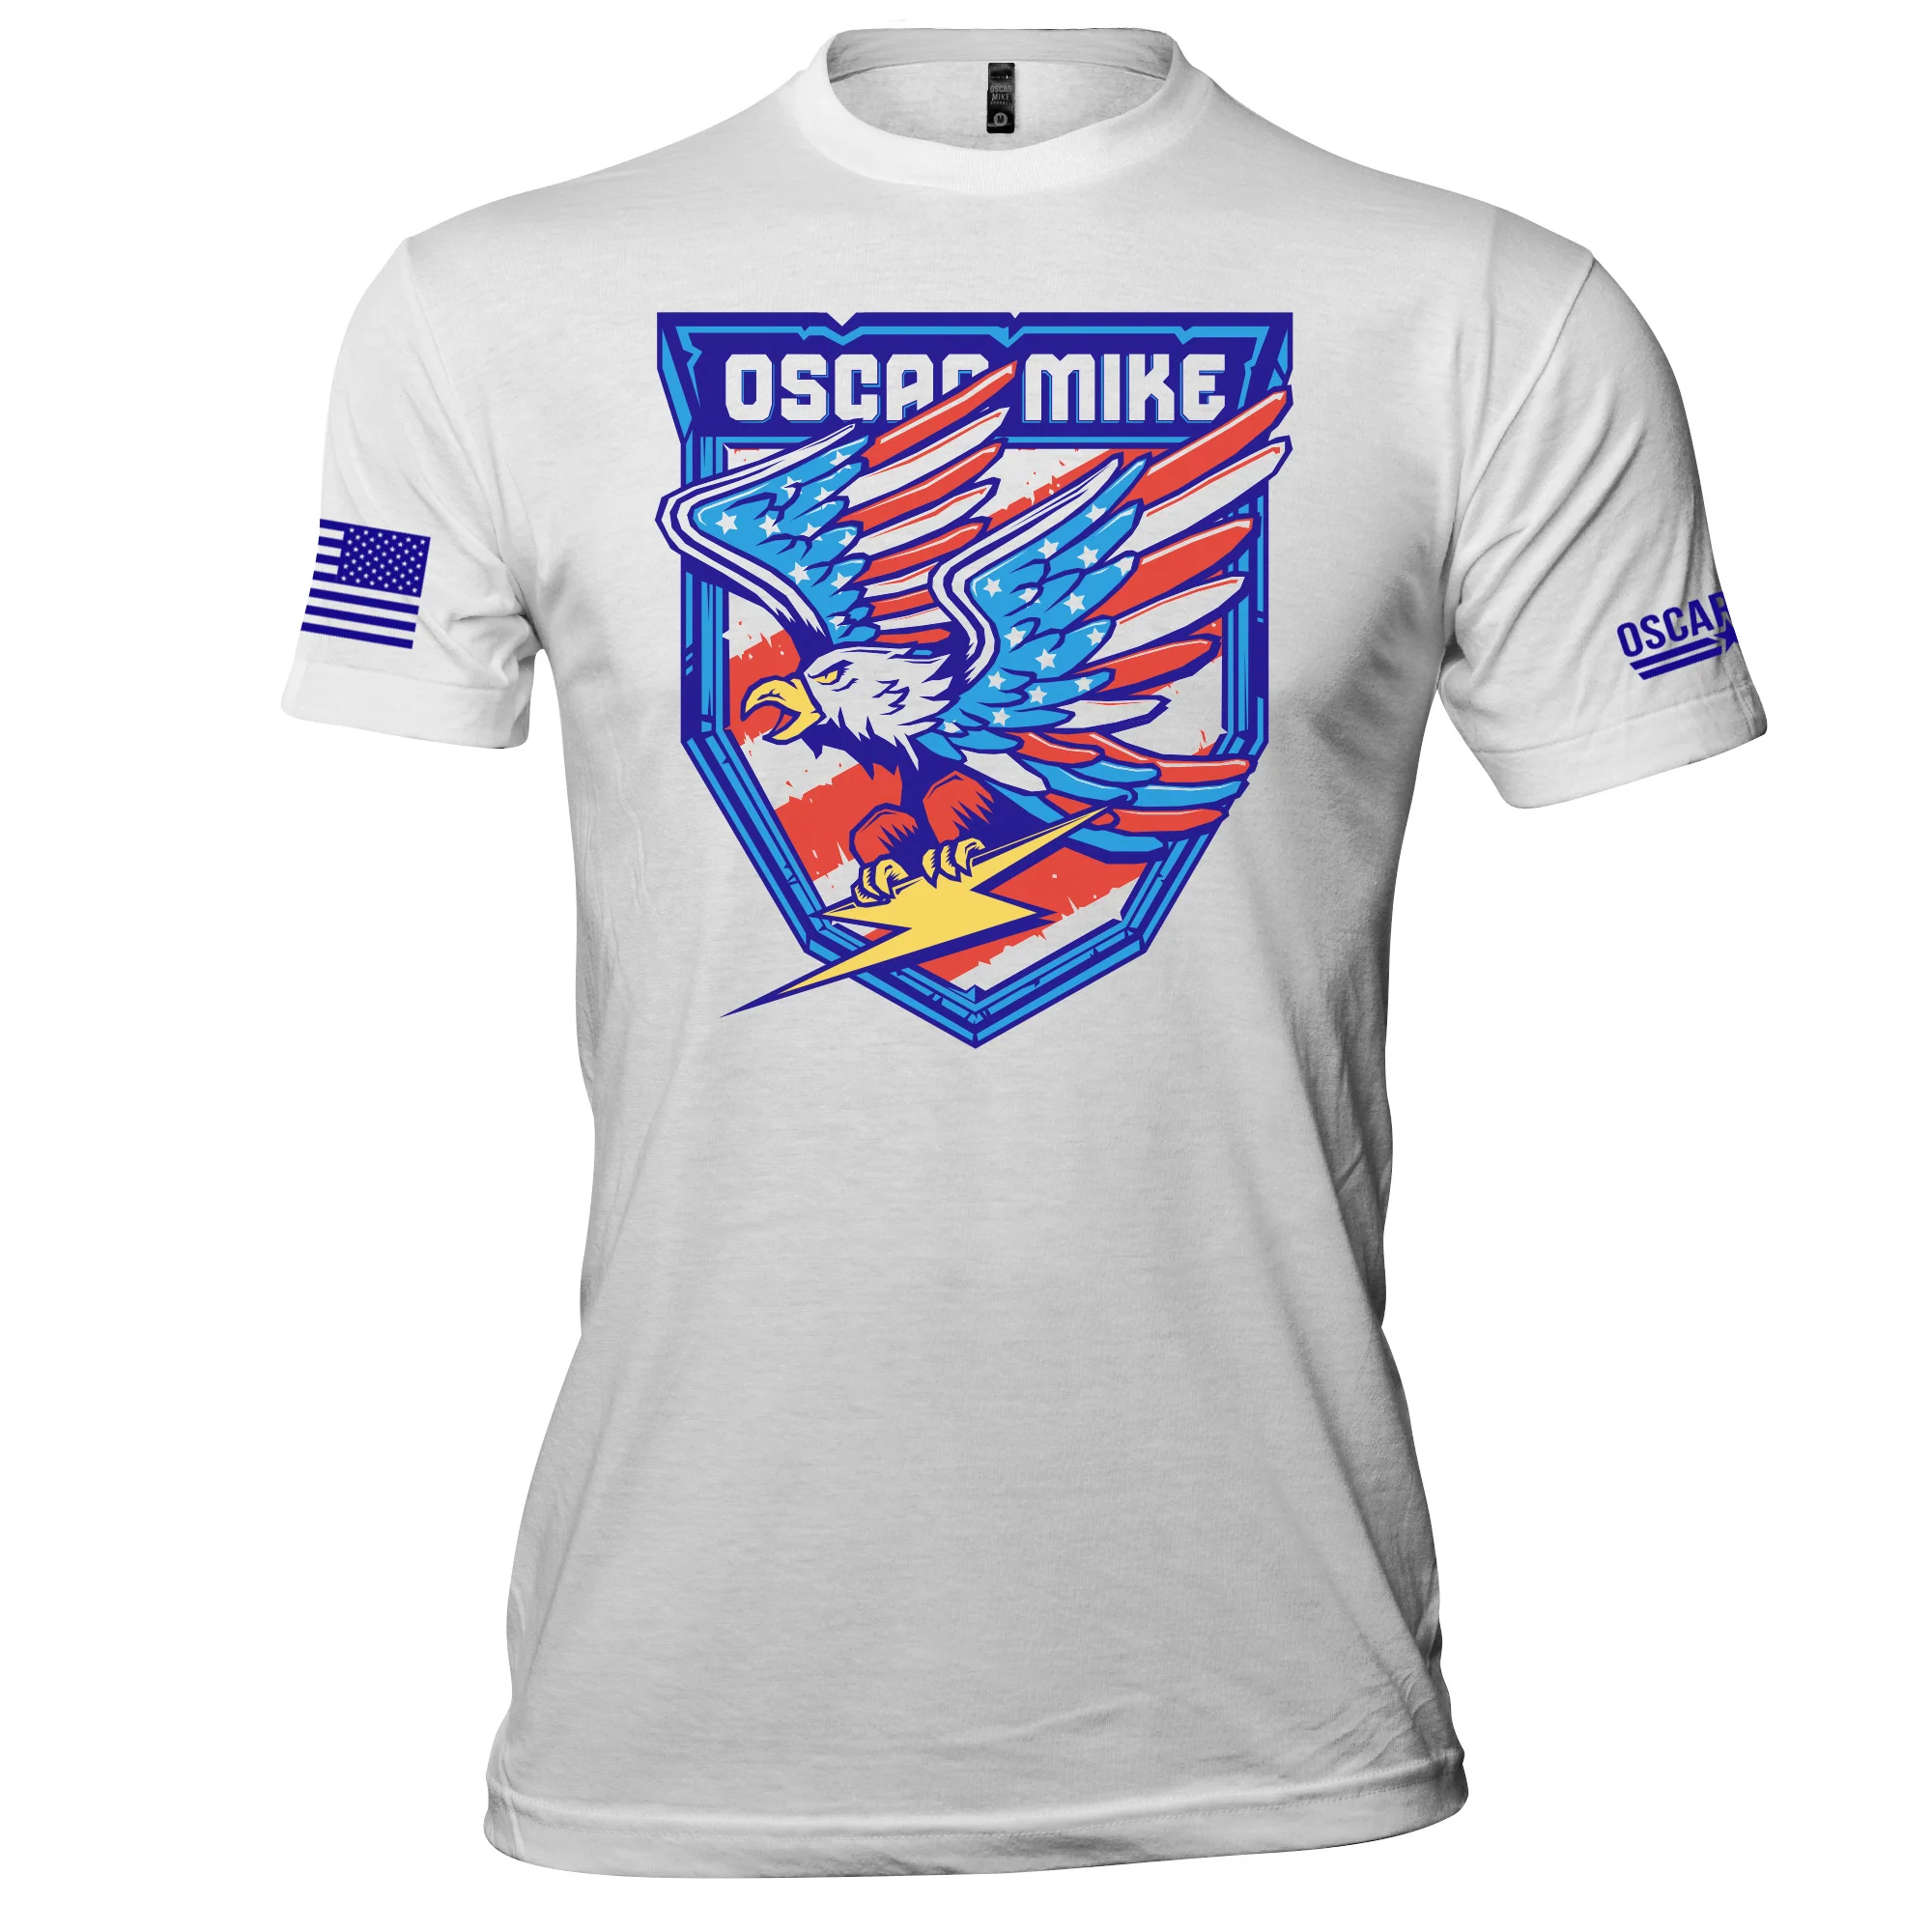 Oscar Mike Men's Ride the Lightning Tee posted by ProdOrigin USA in Men's Apparel